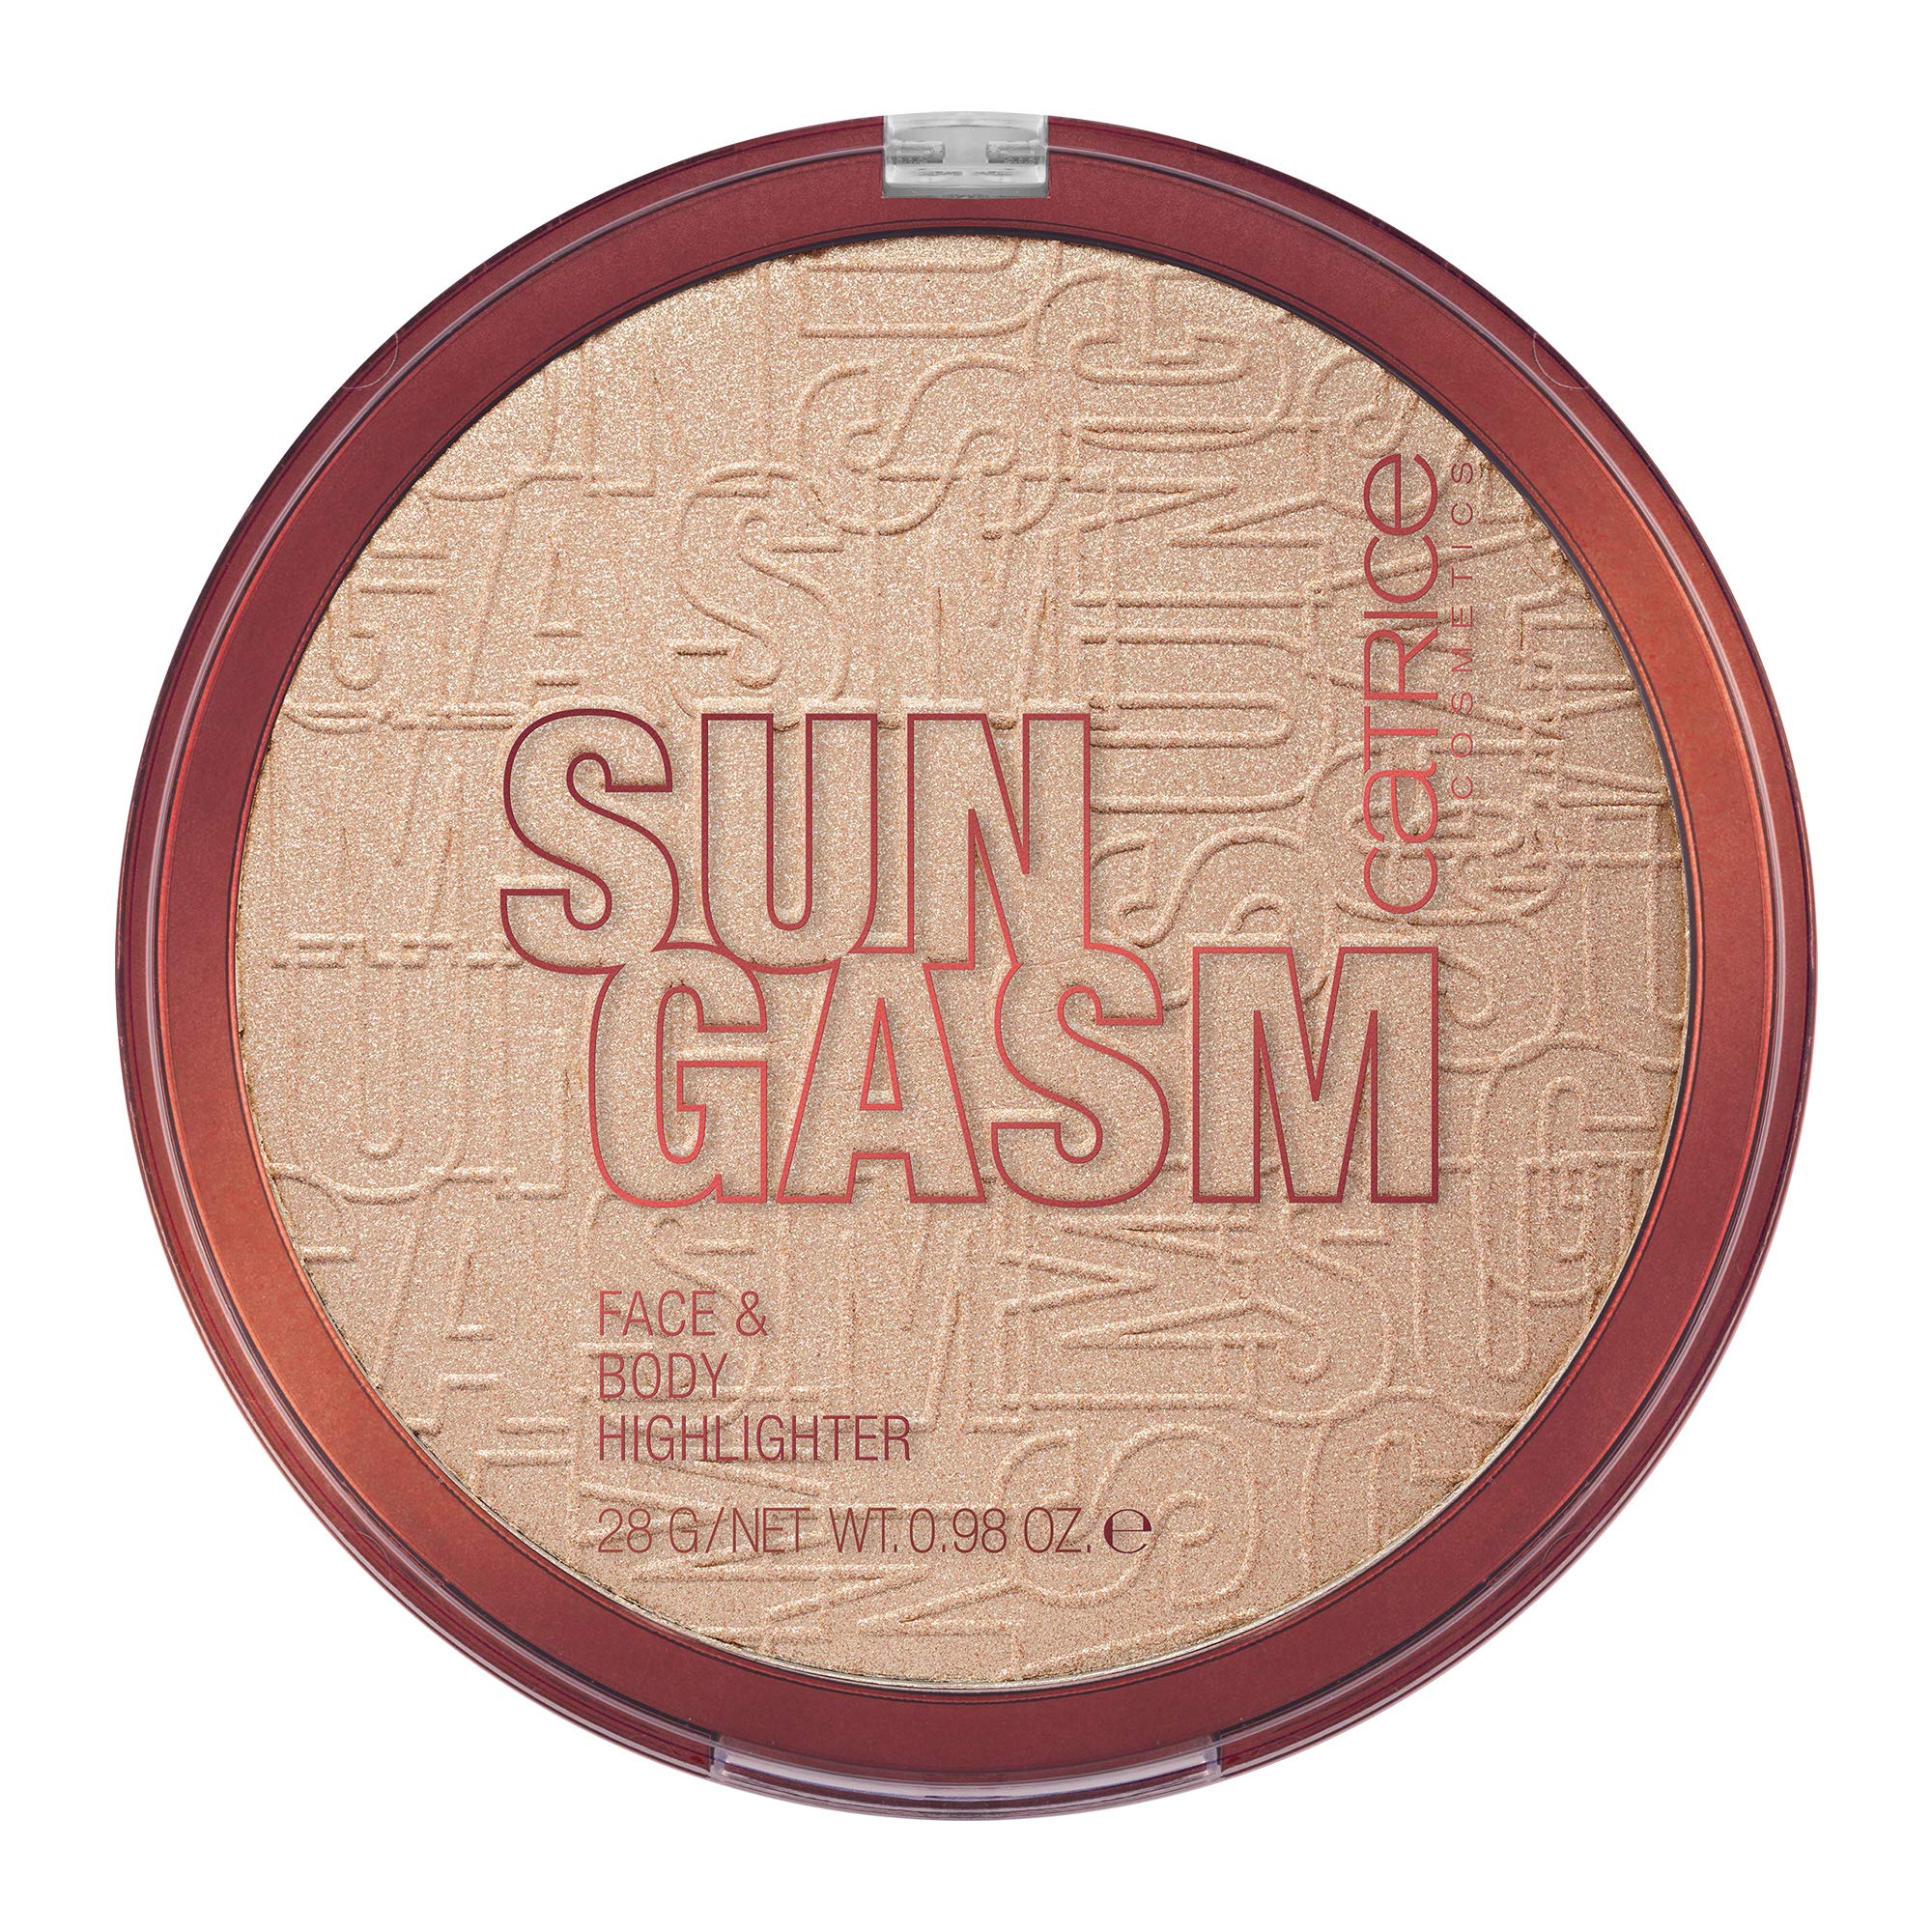 & Powder Catrice | Body SUNGASM Silky With Soft Face Reflecting Jumbo Light Highlighter | Sized,